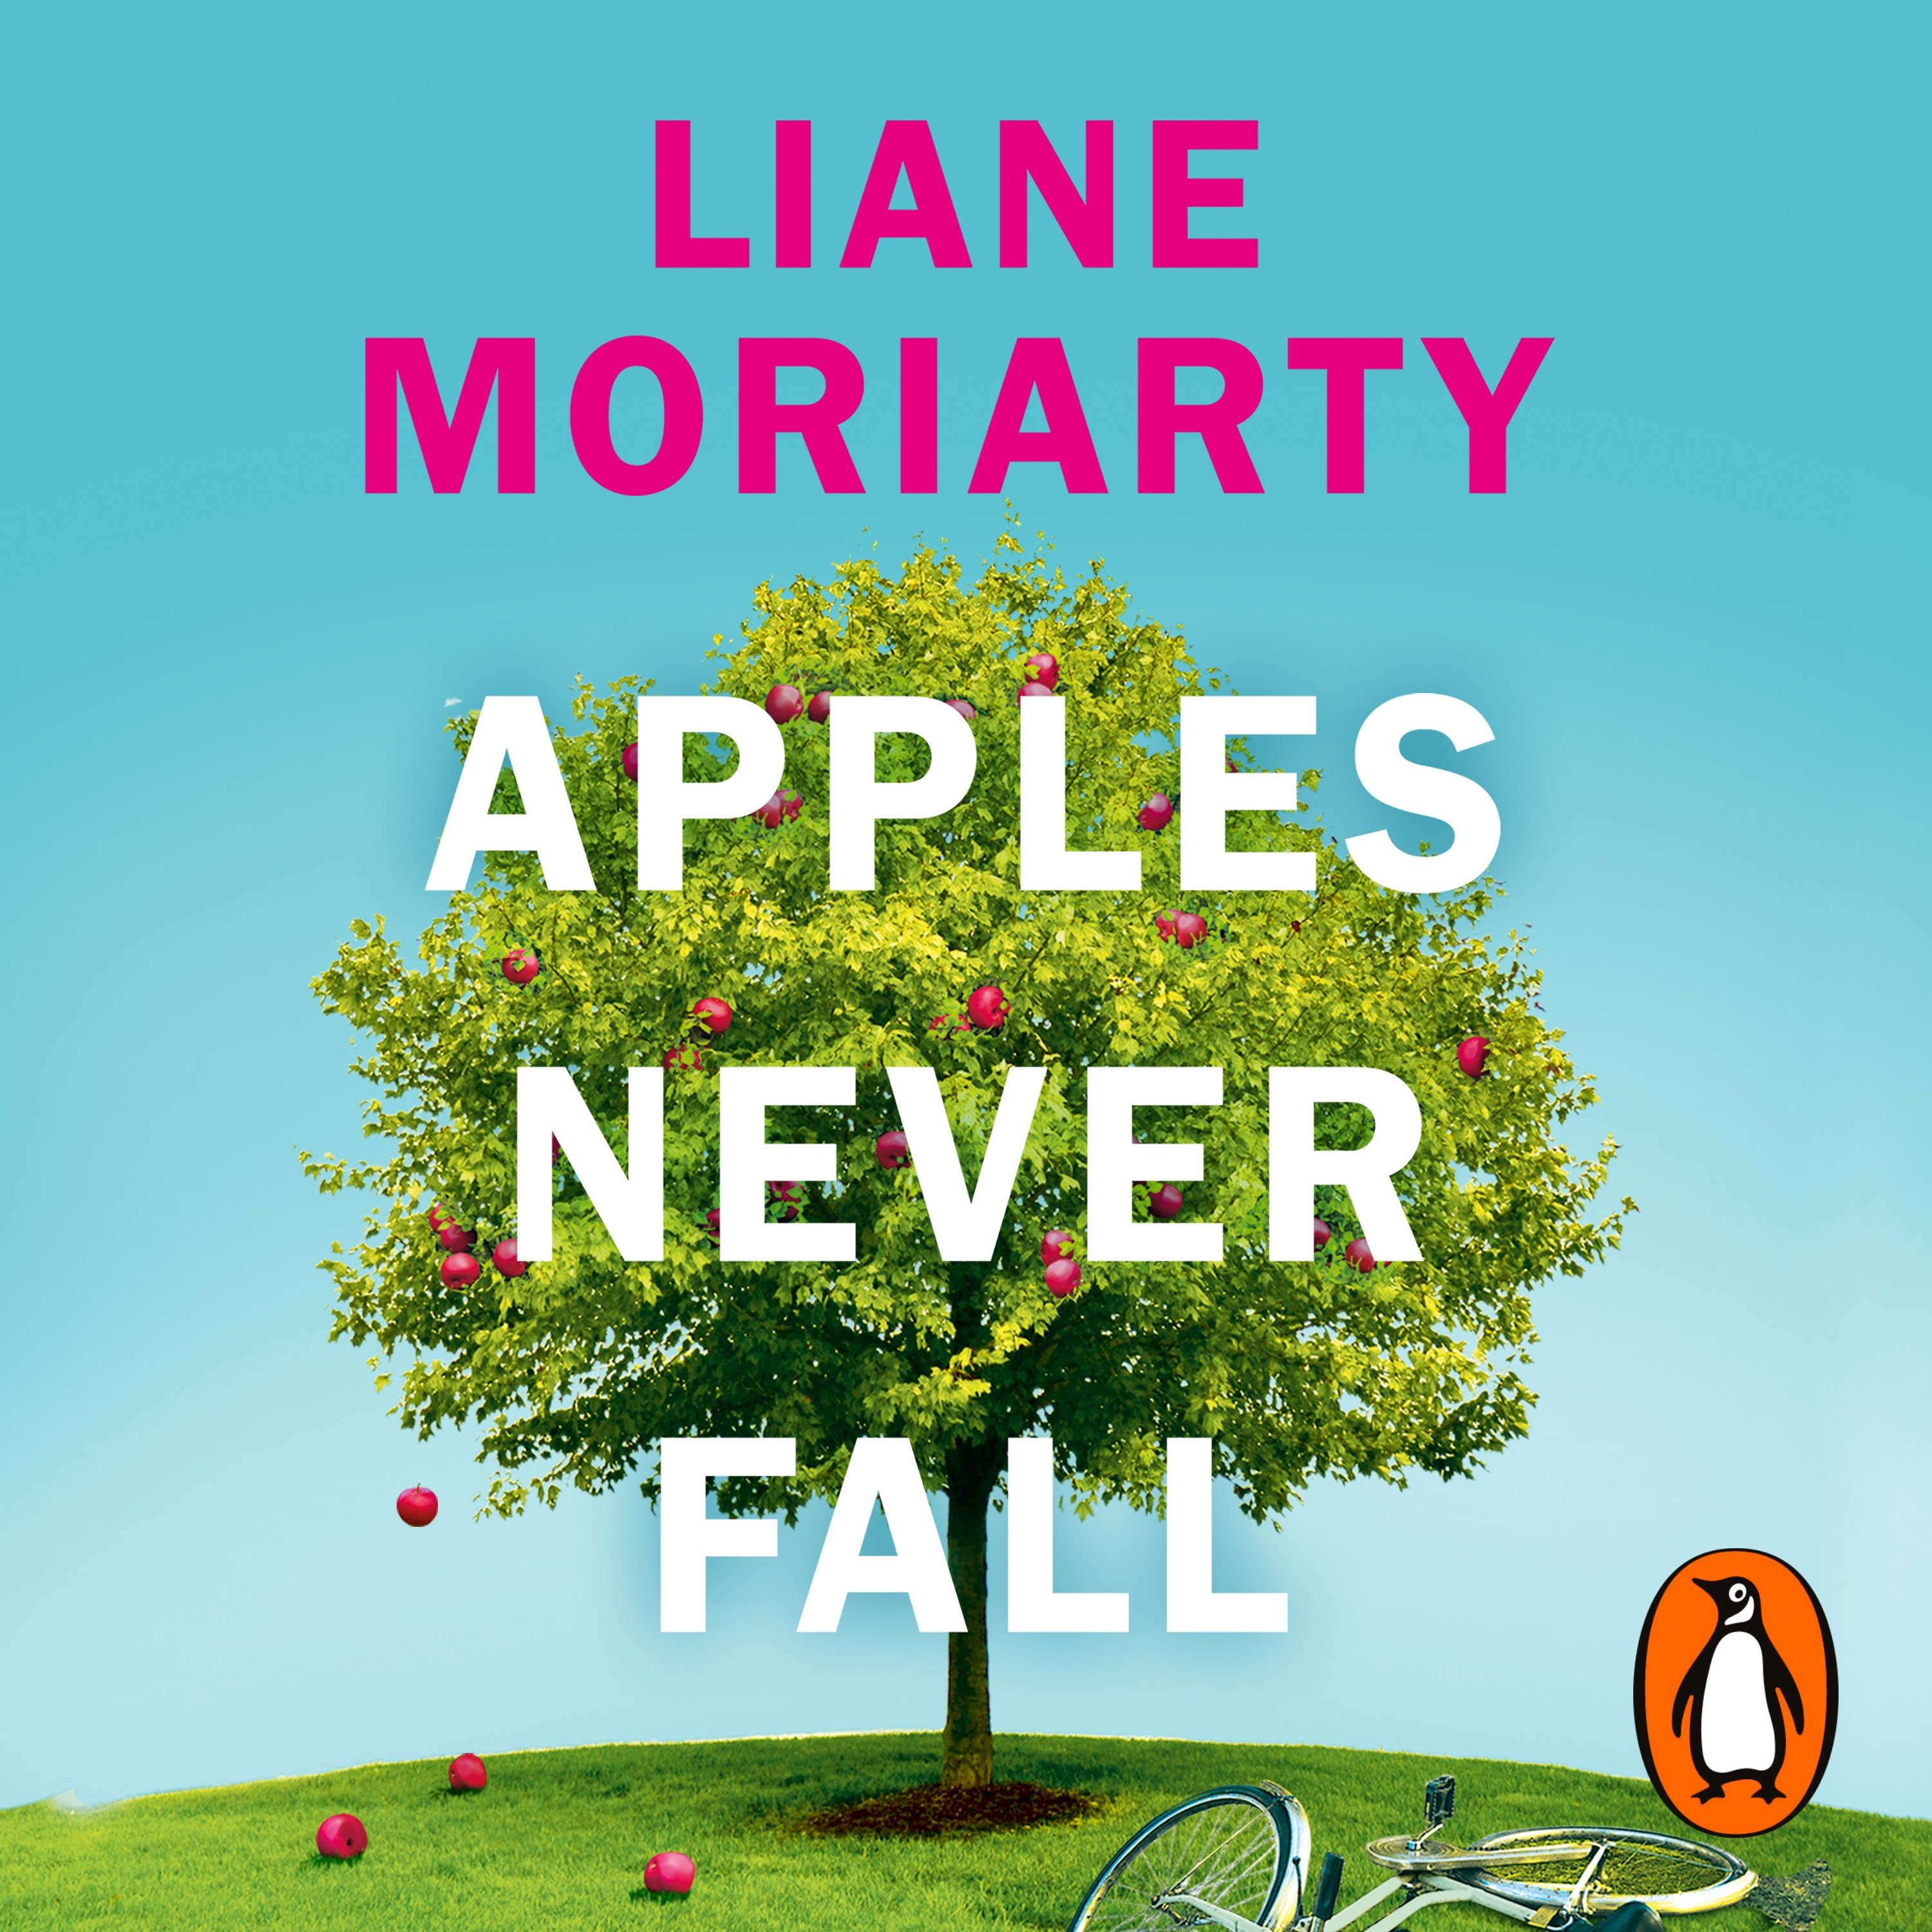 Cover of Apples Never Fall by Liane Moriarty. Red apples falling from an apple tree, against a blue sky. In front of the tree a bicycle is lying on the grass. The author's name is in pink at the top, and the title is in white across the centre of the tree.